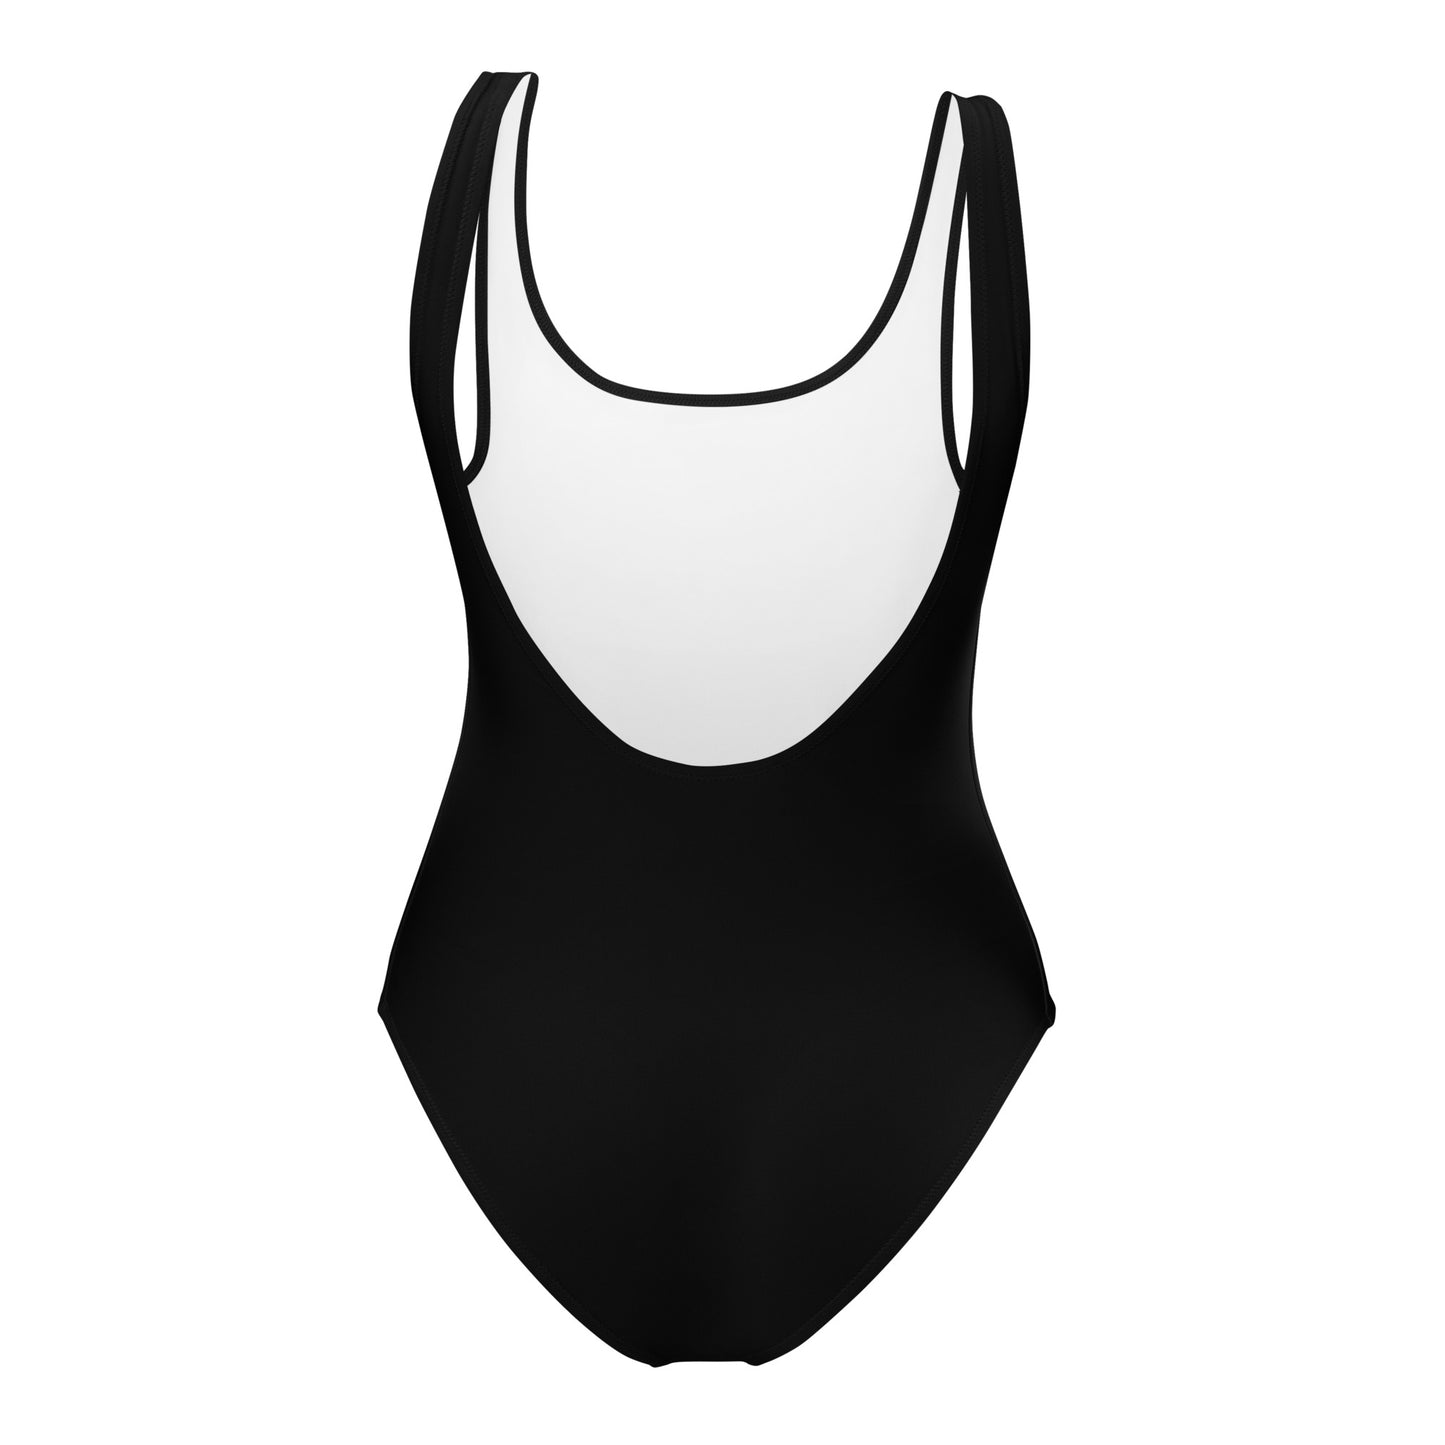 Germany Flag - Sustainably Made One-Piece Swimsuit